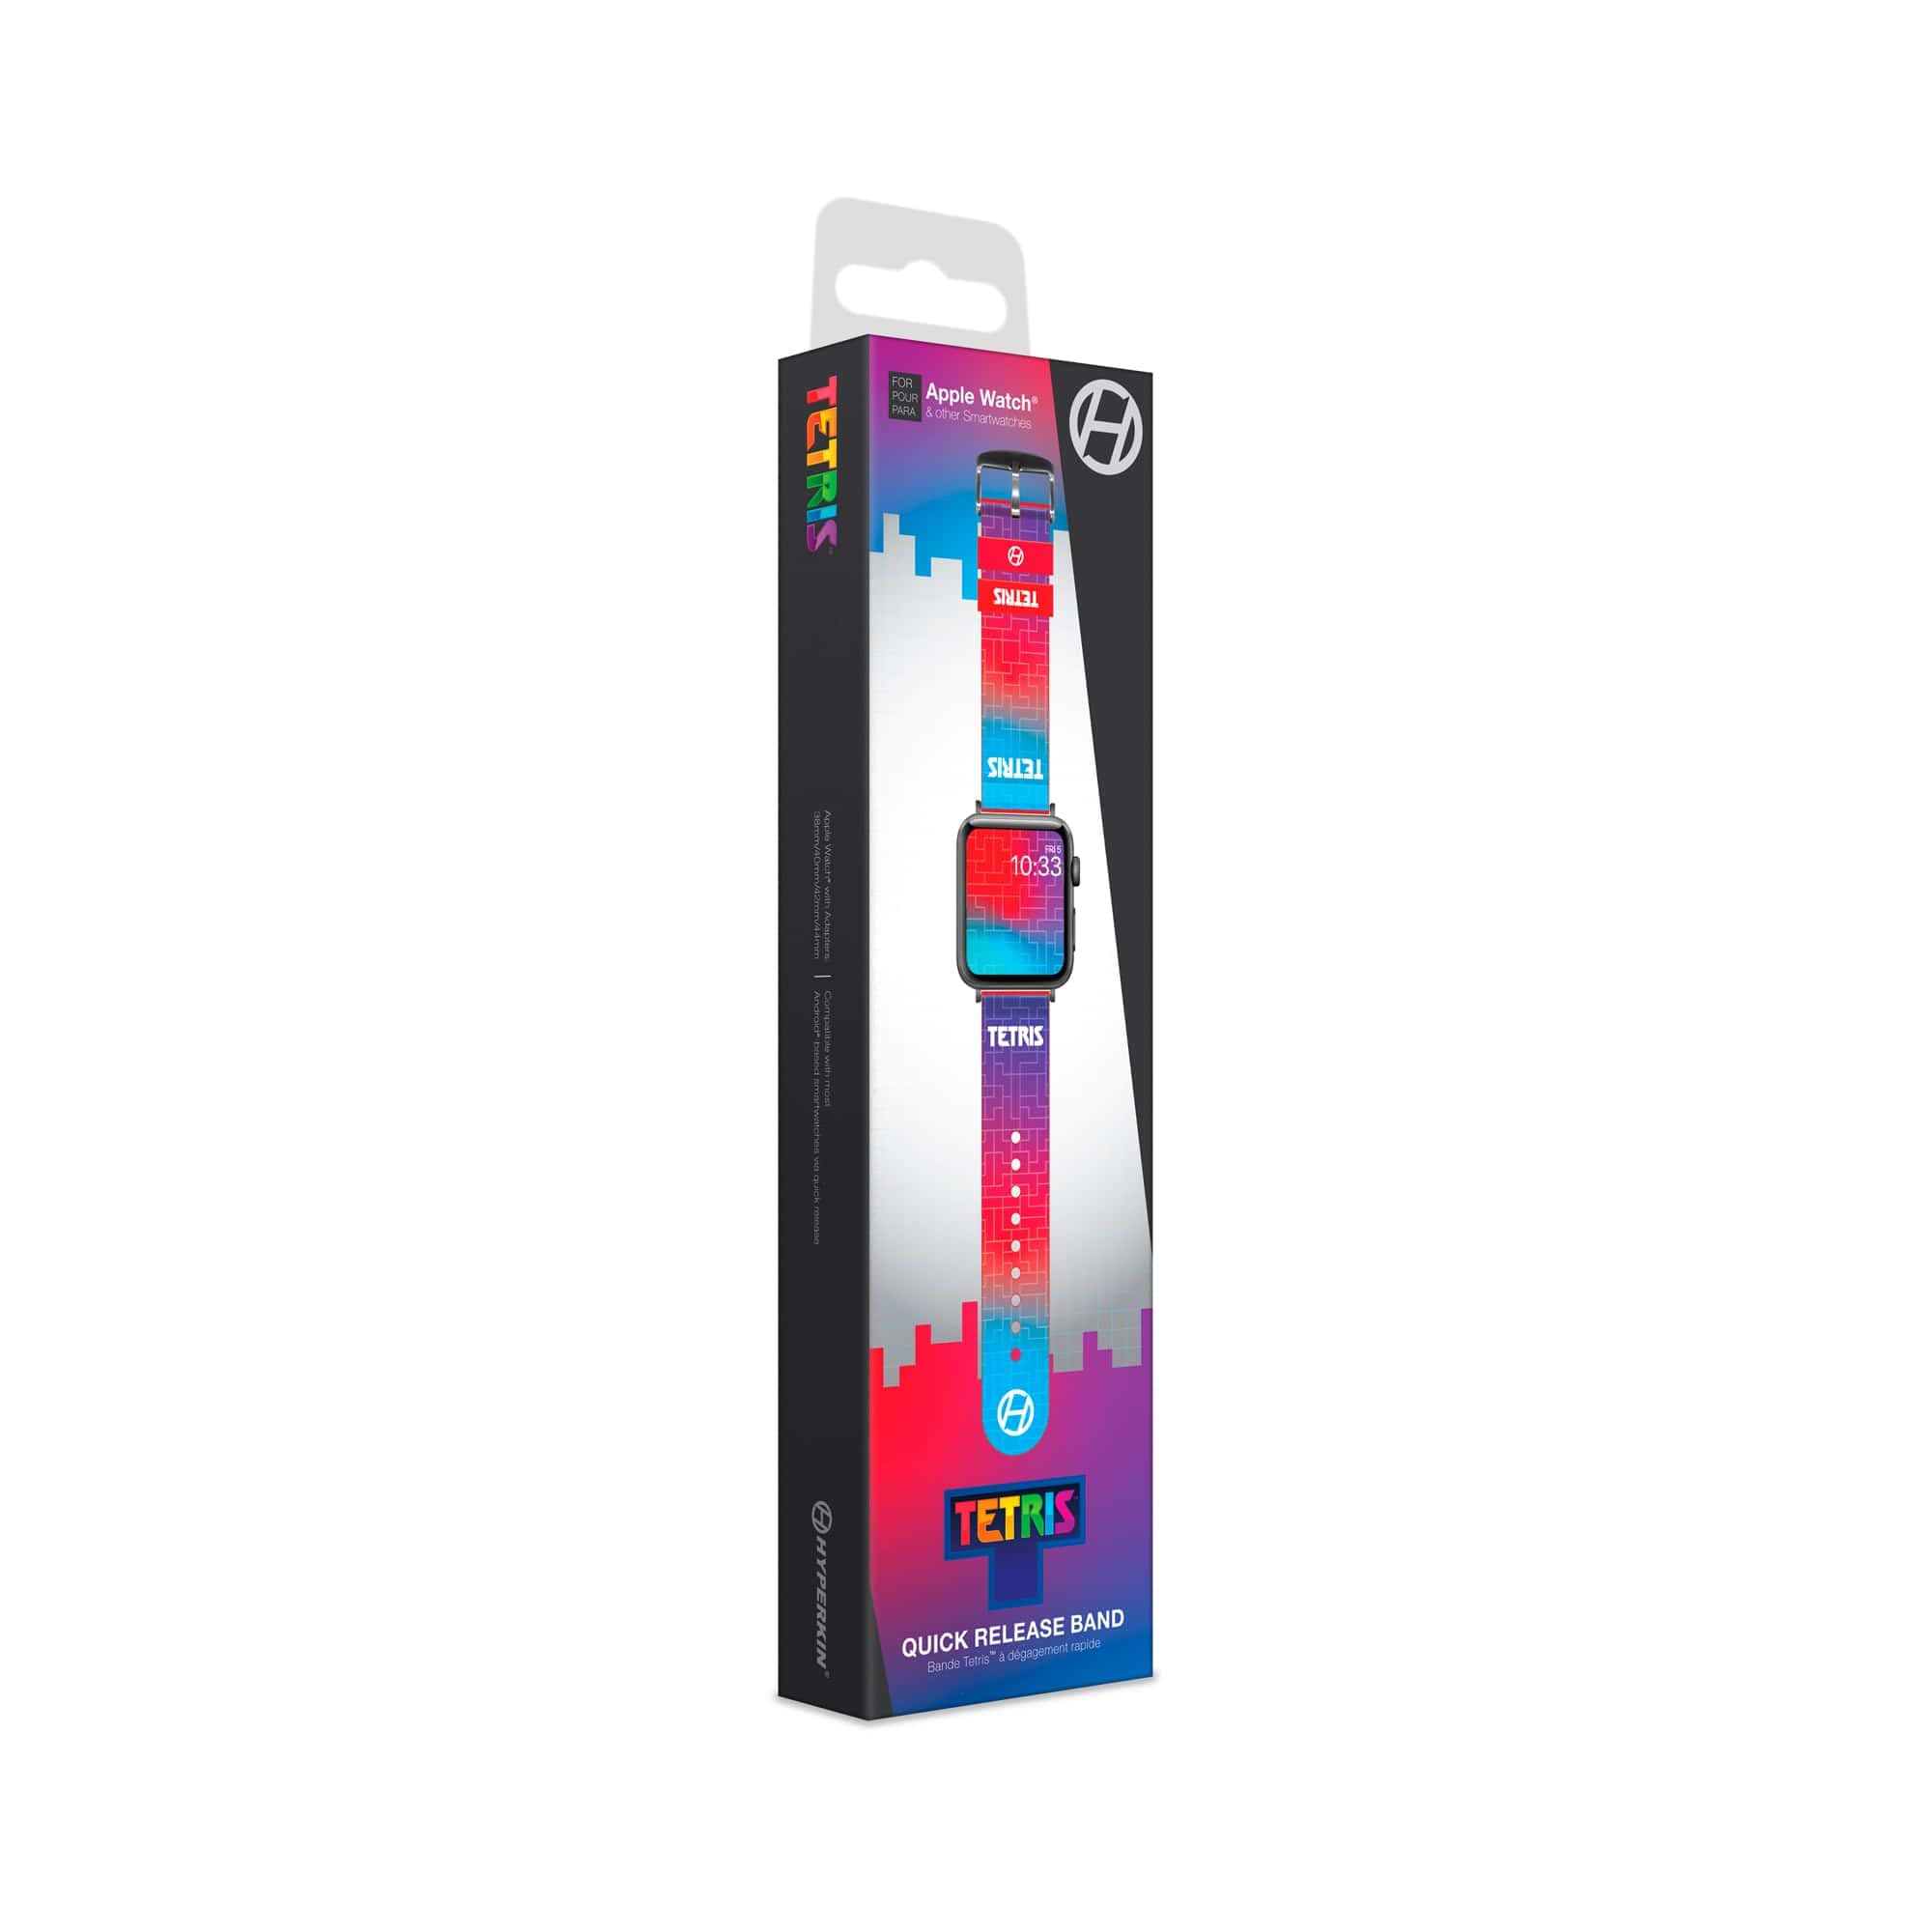 Official Tetris® Quick Release Band for Smartwatch/Traditional Watches (Hyper Gradient) - Hyperkin